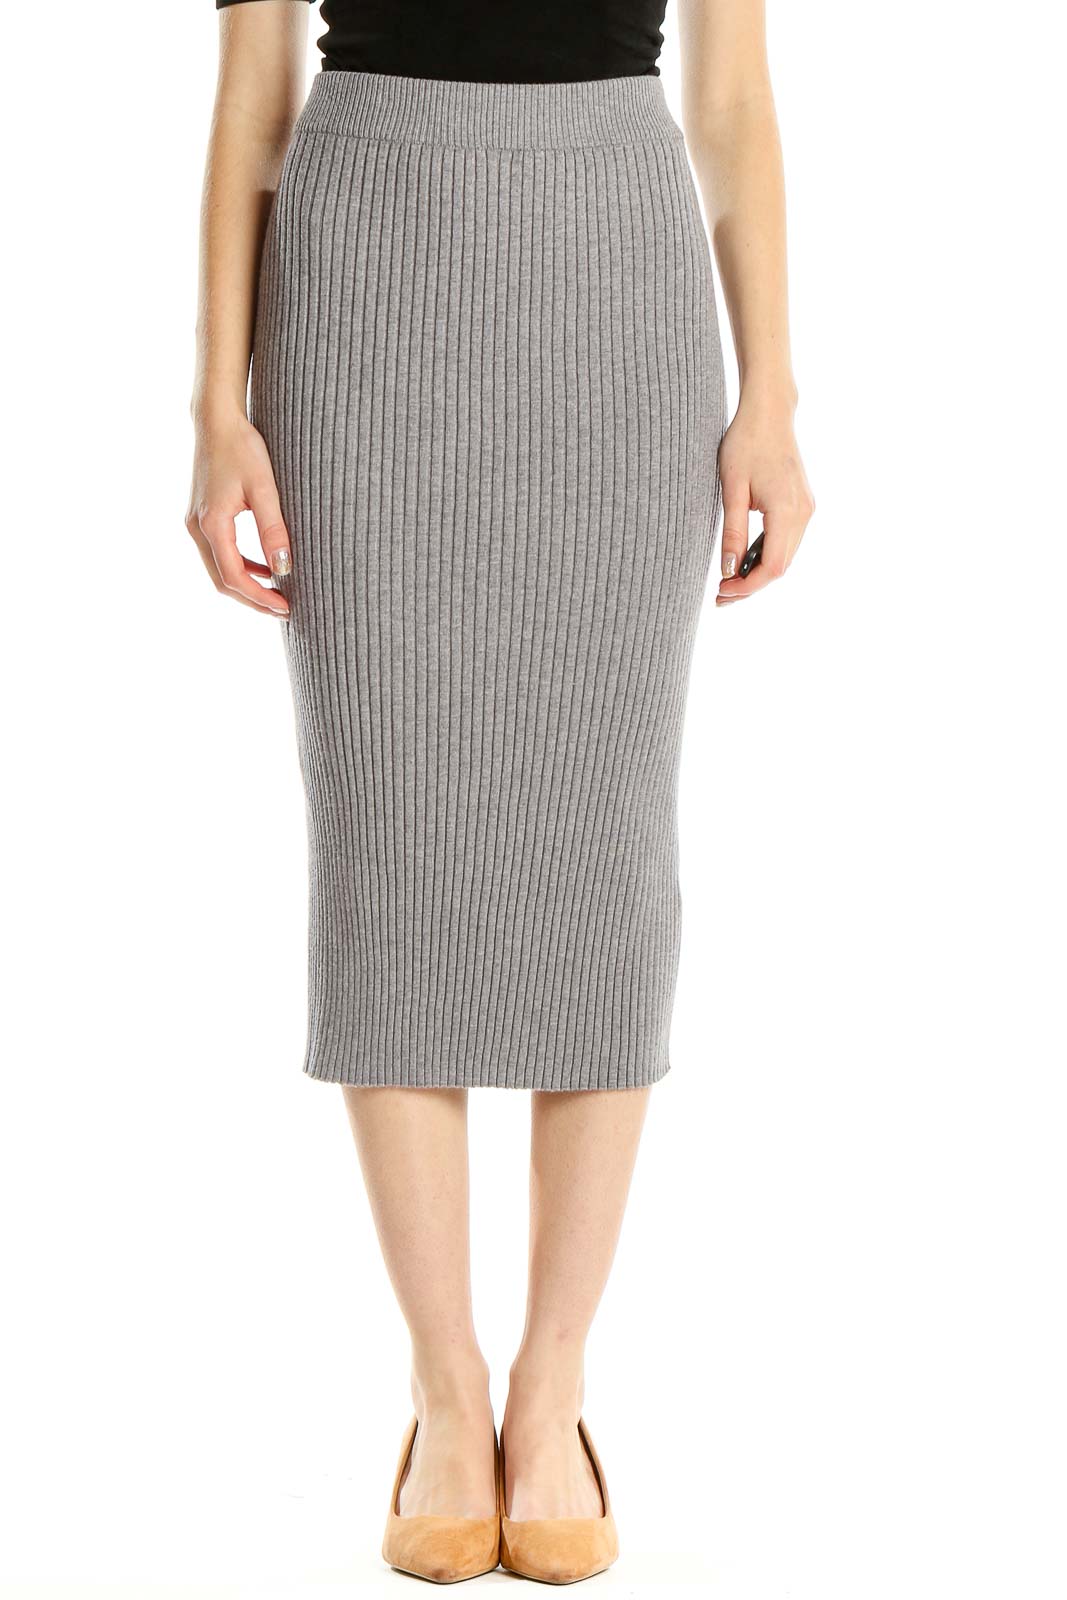 Gray Knit Pencil Skirt Front